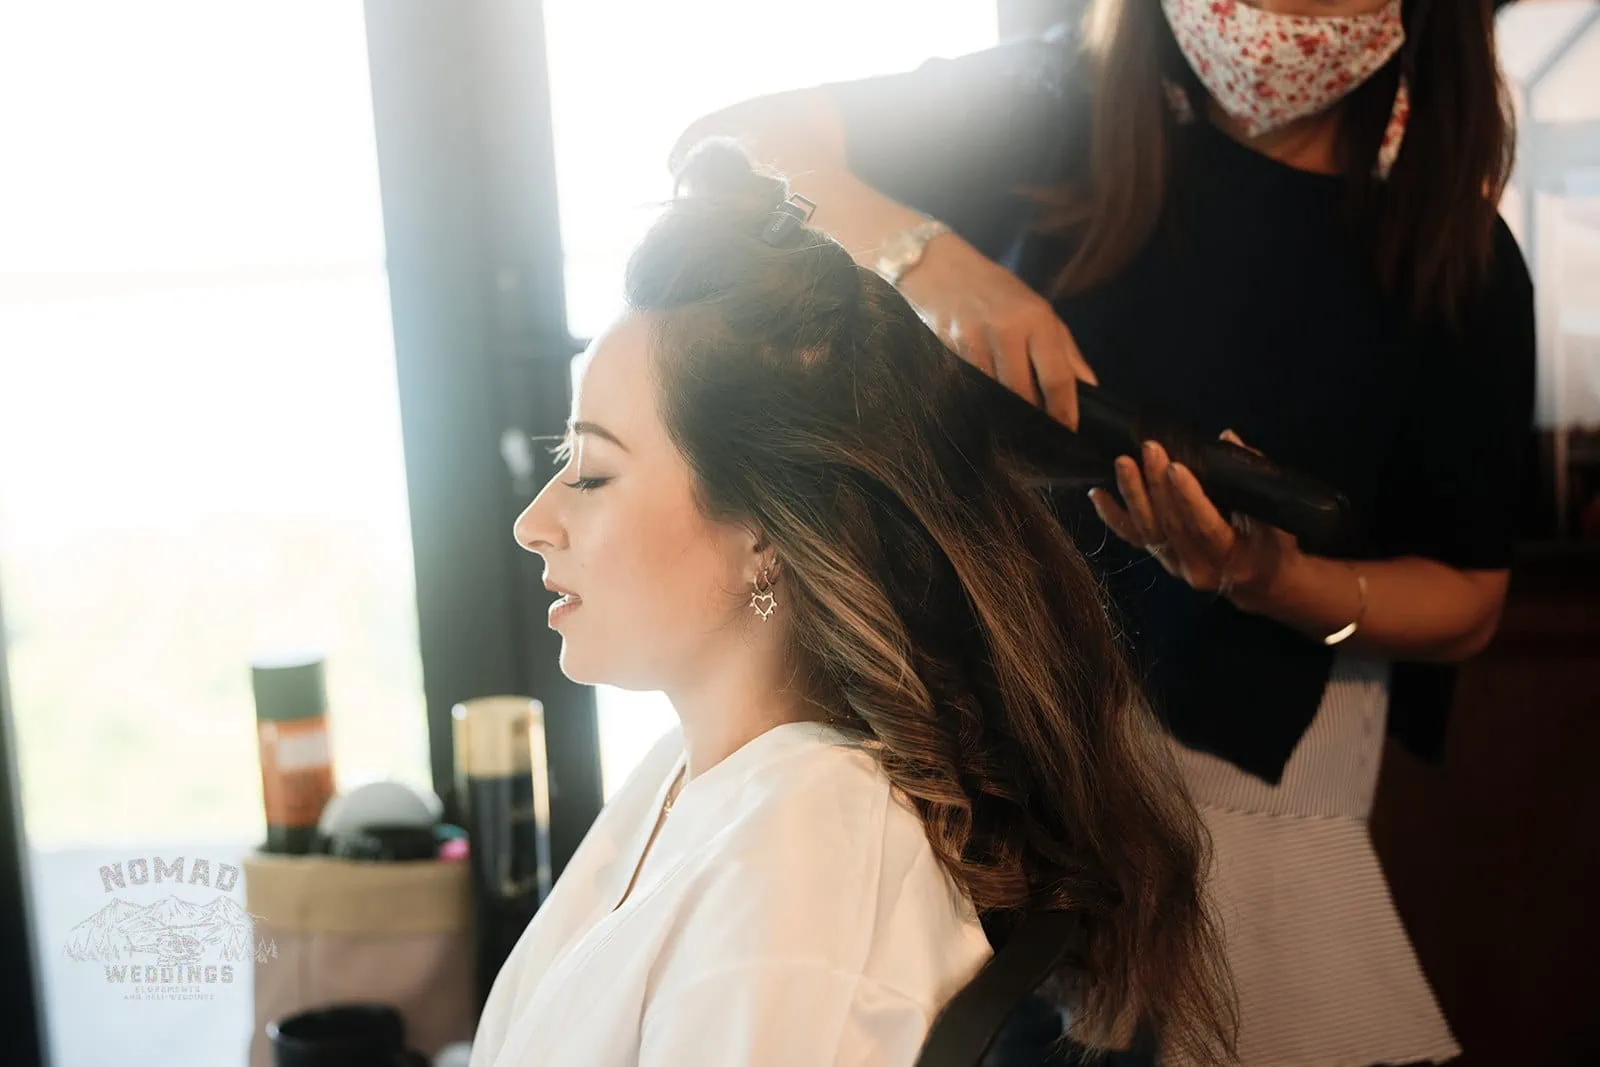 A woman getting her hair done for an enchanting elopement wedding.